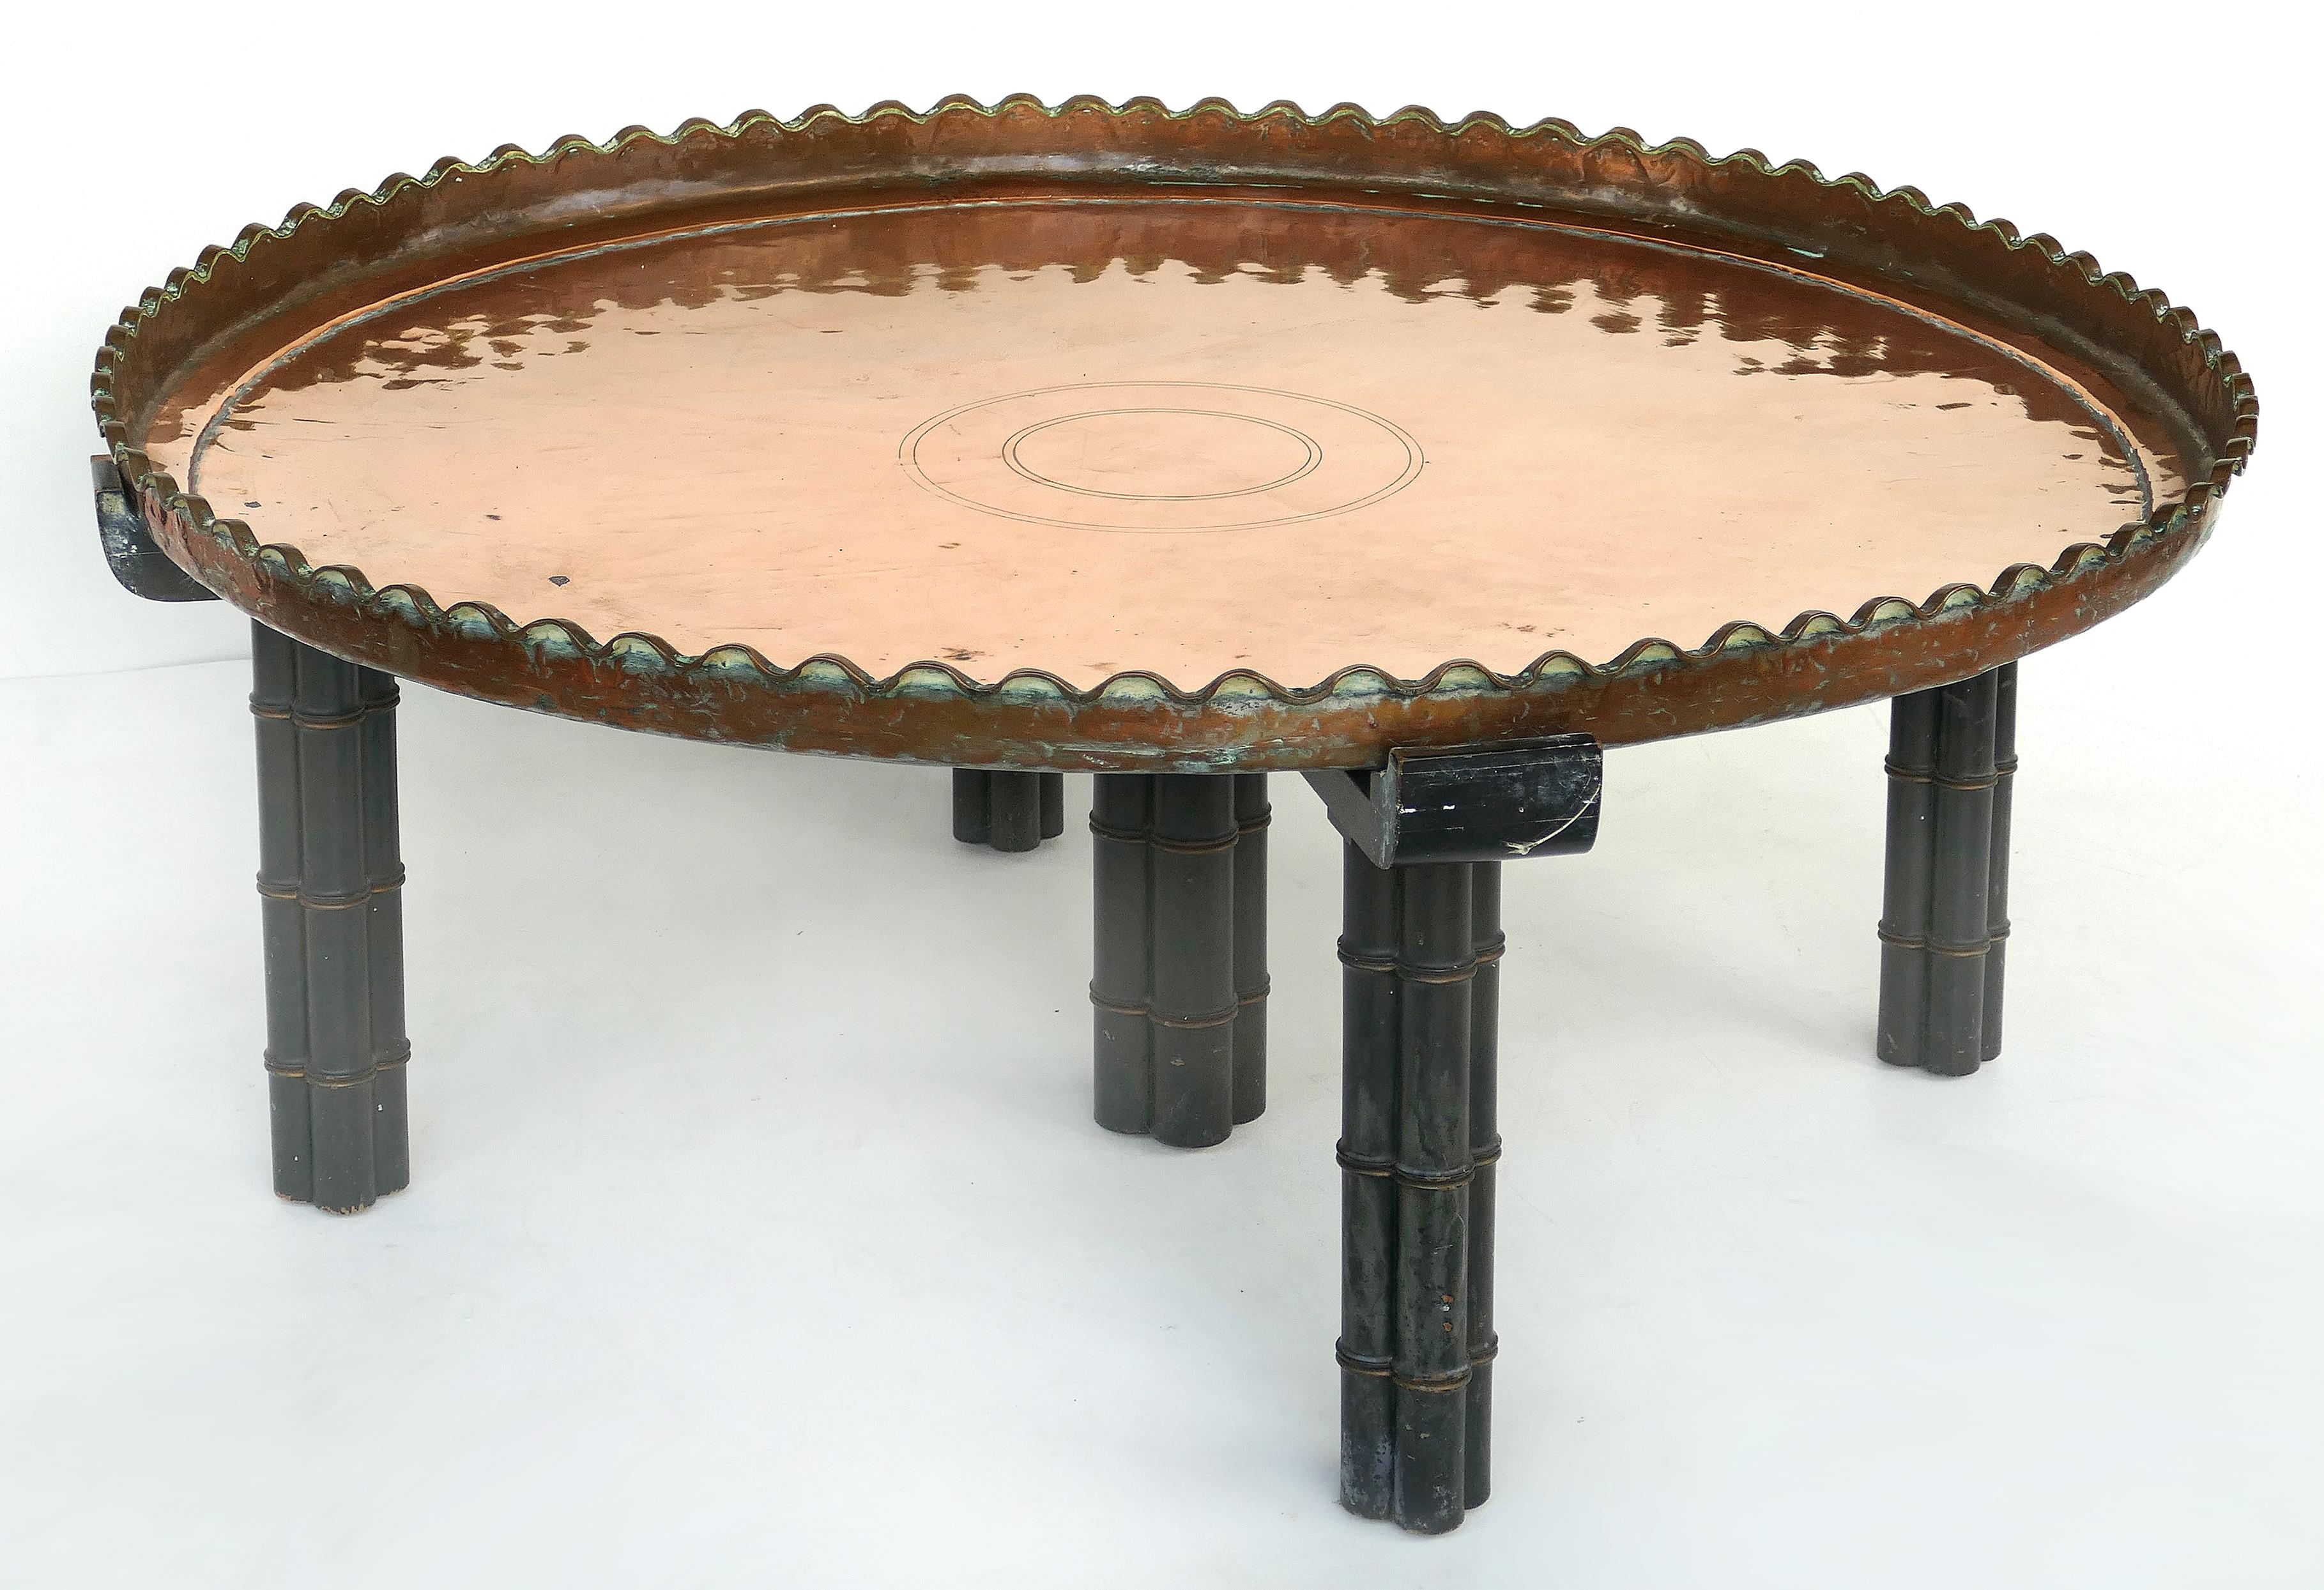 Substantial copper tray table on wood stand

Offered for sale is a substantial copper tray table with scalloped edges which is supported by a faux-bamboo carved wooden base. The table is large and the removable copper tray is quite heavy. The